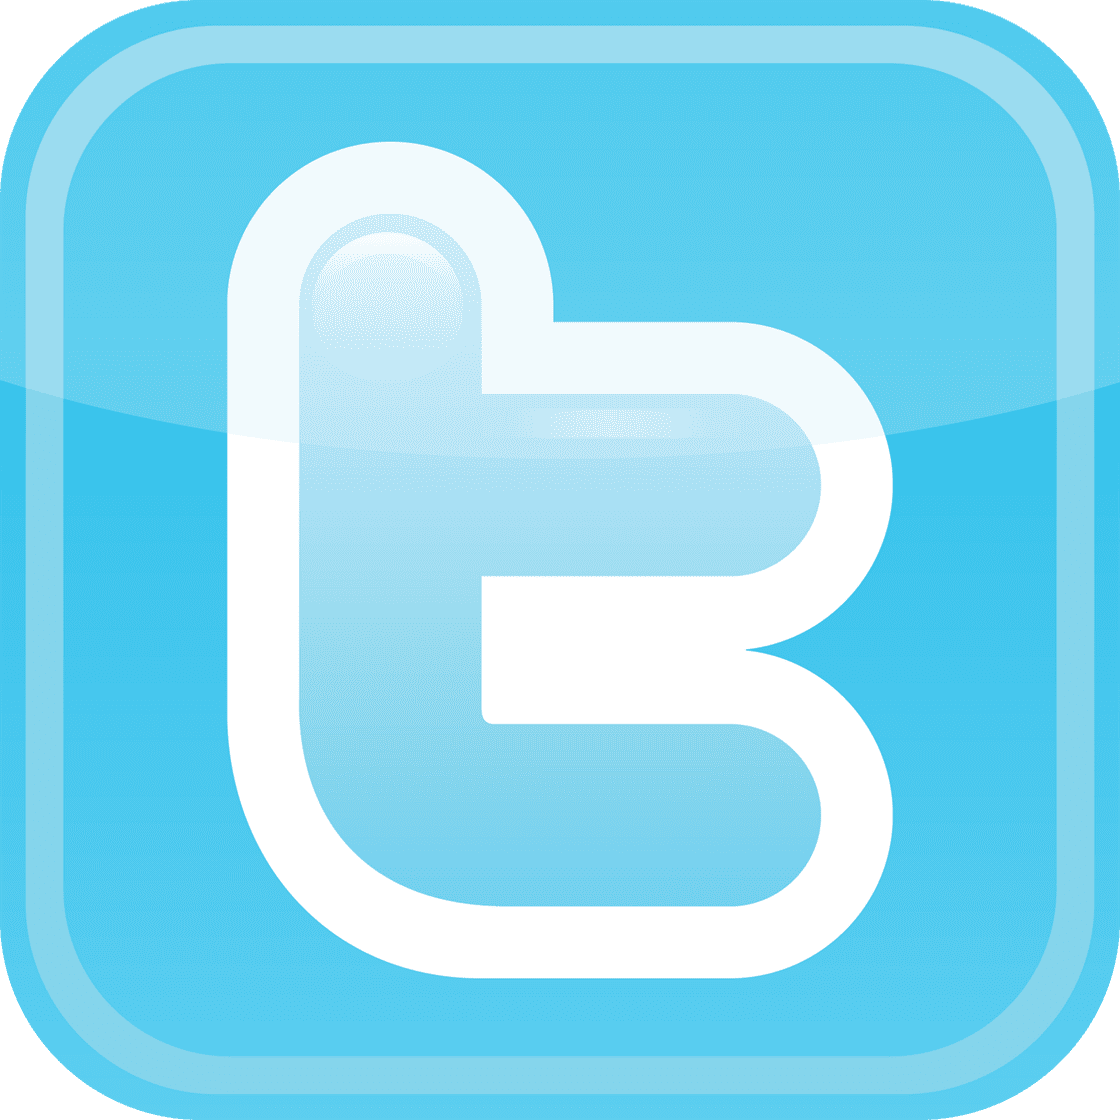 official twitter logo download